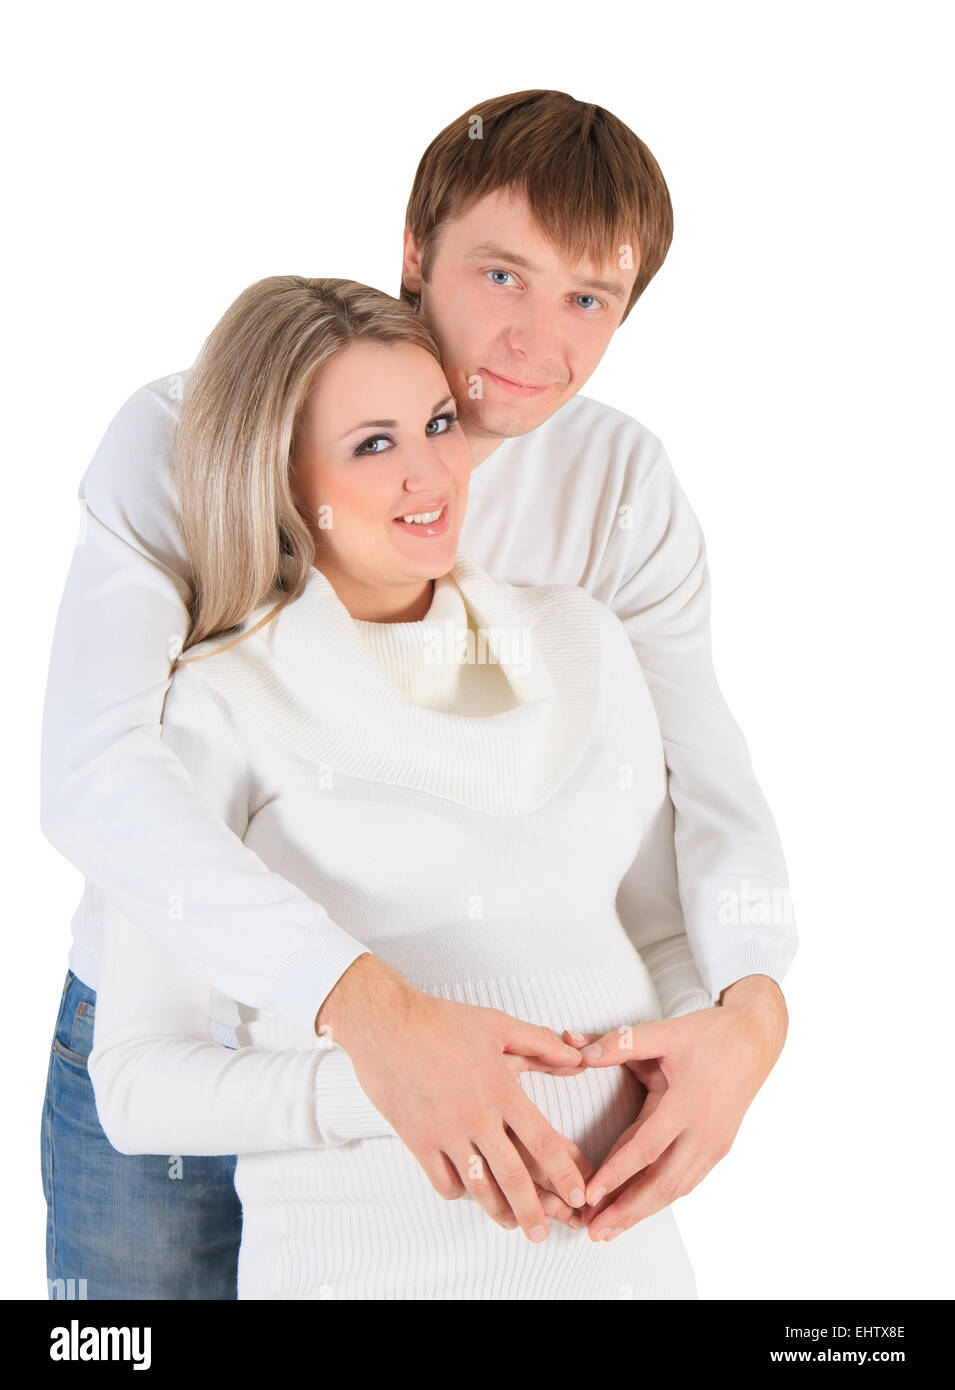 Heart from hands on belly of pregnant woman Stock Photo